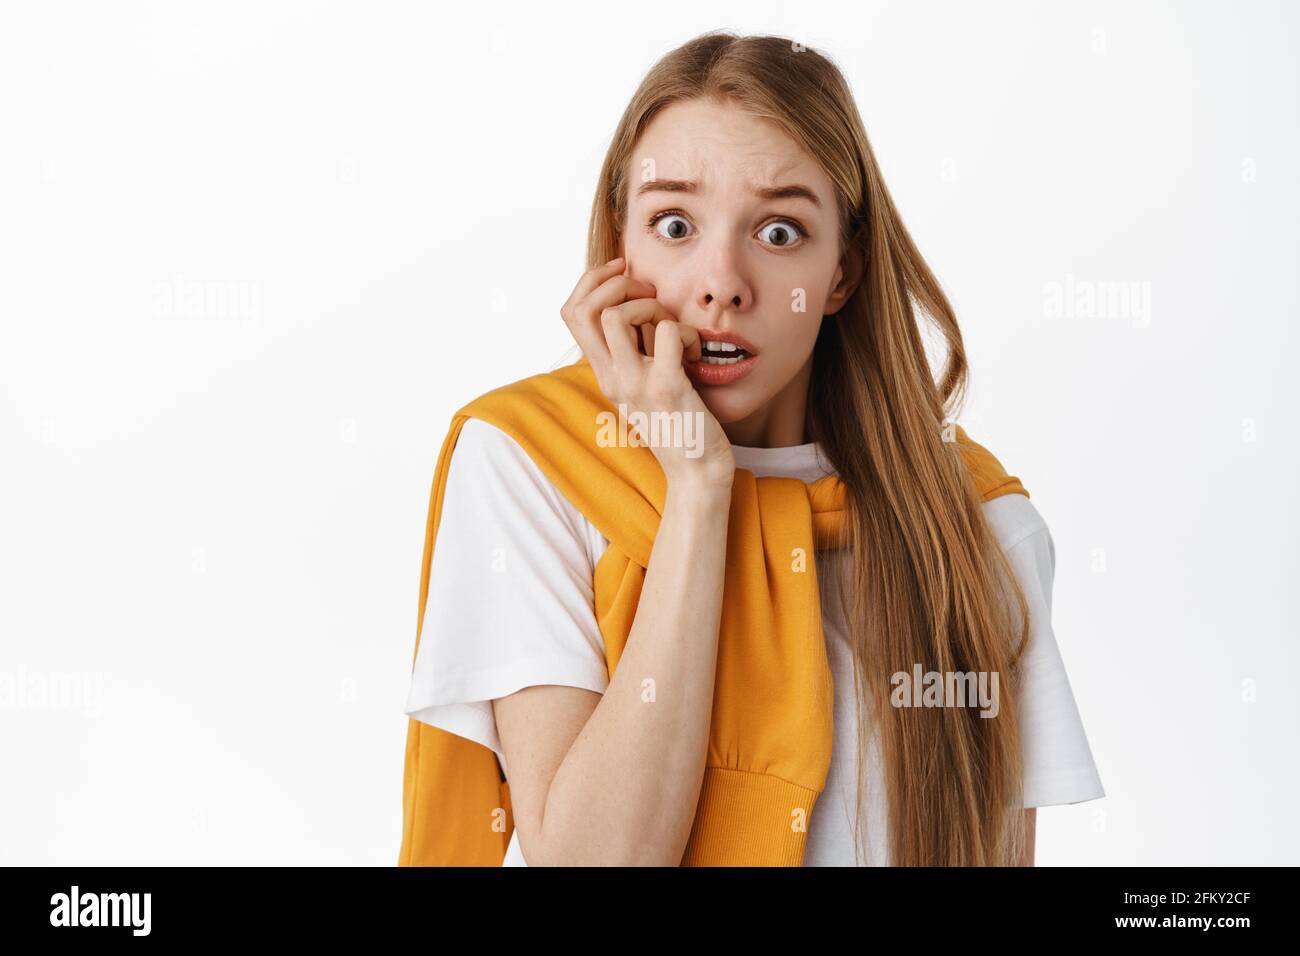 Close up of shocked and scared blond woman, biting fingers and gasping, staring startled and frightened, afraid of something scary, standing over Stock Photo